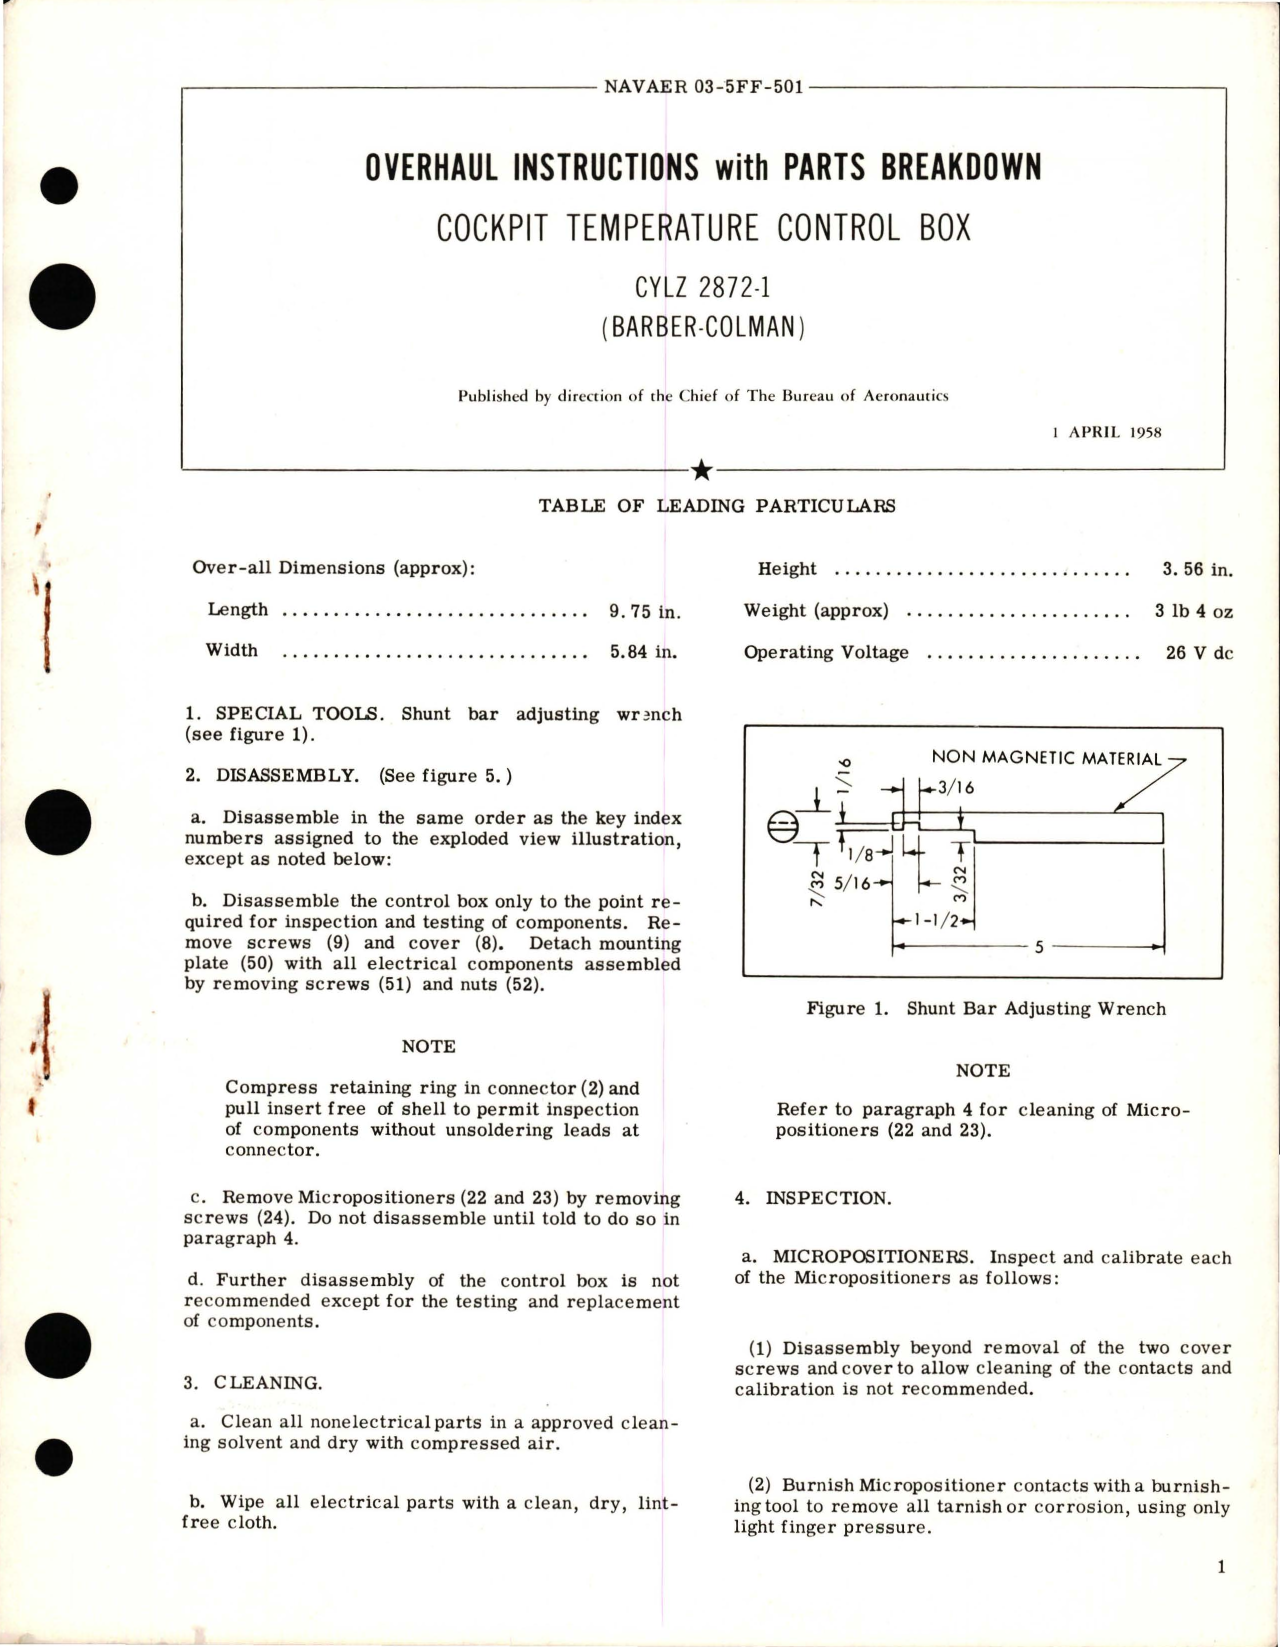 Sample page 1 from AirCorps Library document: Overhaul Instructions with Parts Breakdown for Cockpit Temperature Control Box - CYLZ 2872-1